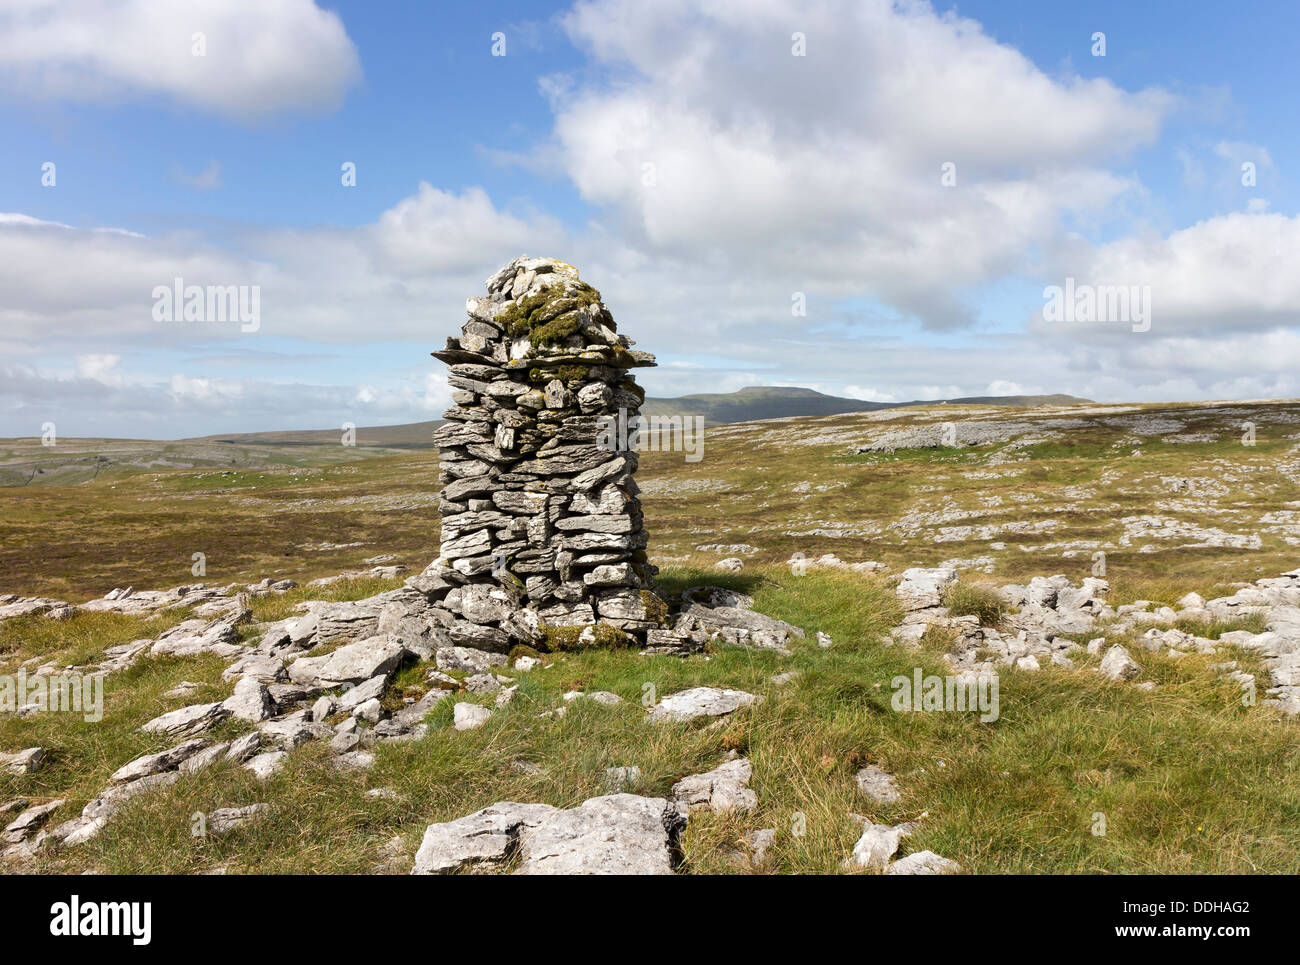 Cairn on Moughton Fell with the Mountain of Ingleborough in the Background Yorkshire Dales UK Stock Photo